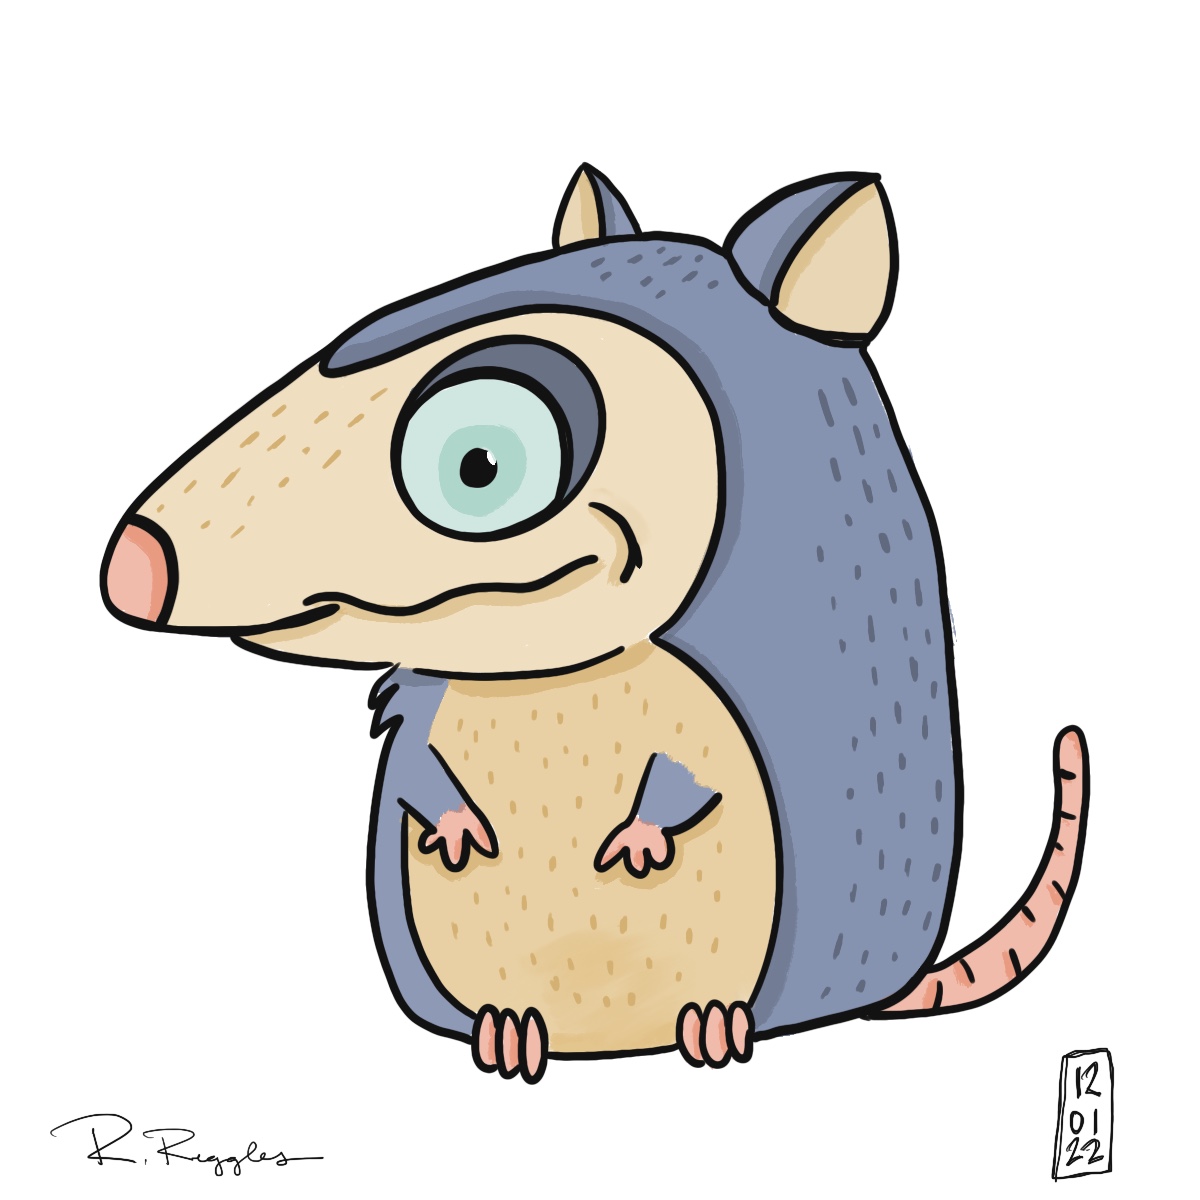 Stubby hands opossum doodle by Rebecca Ruggles